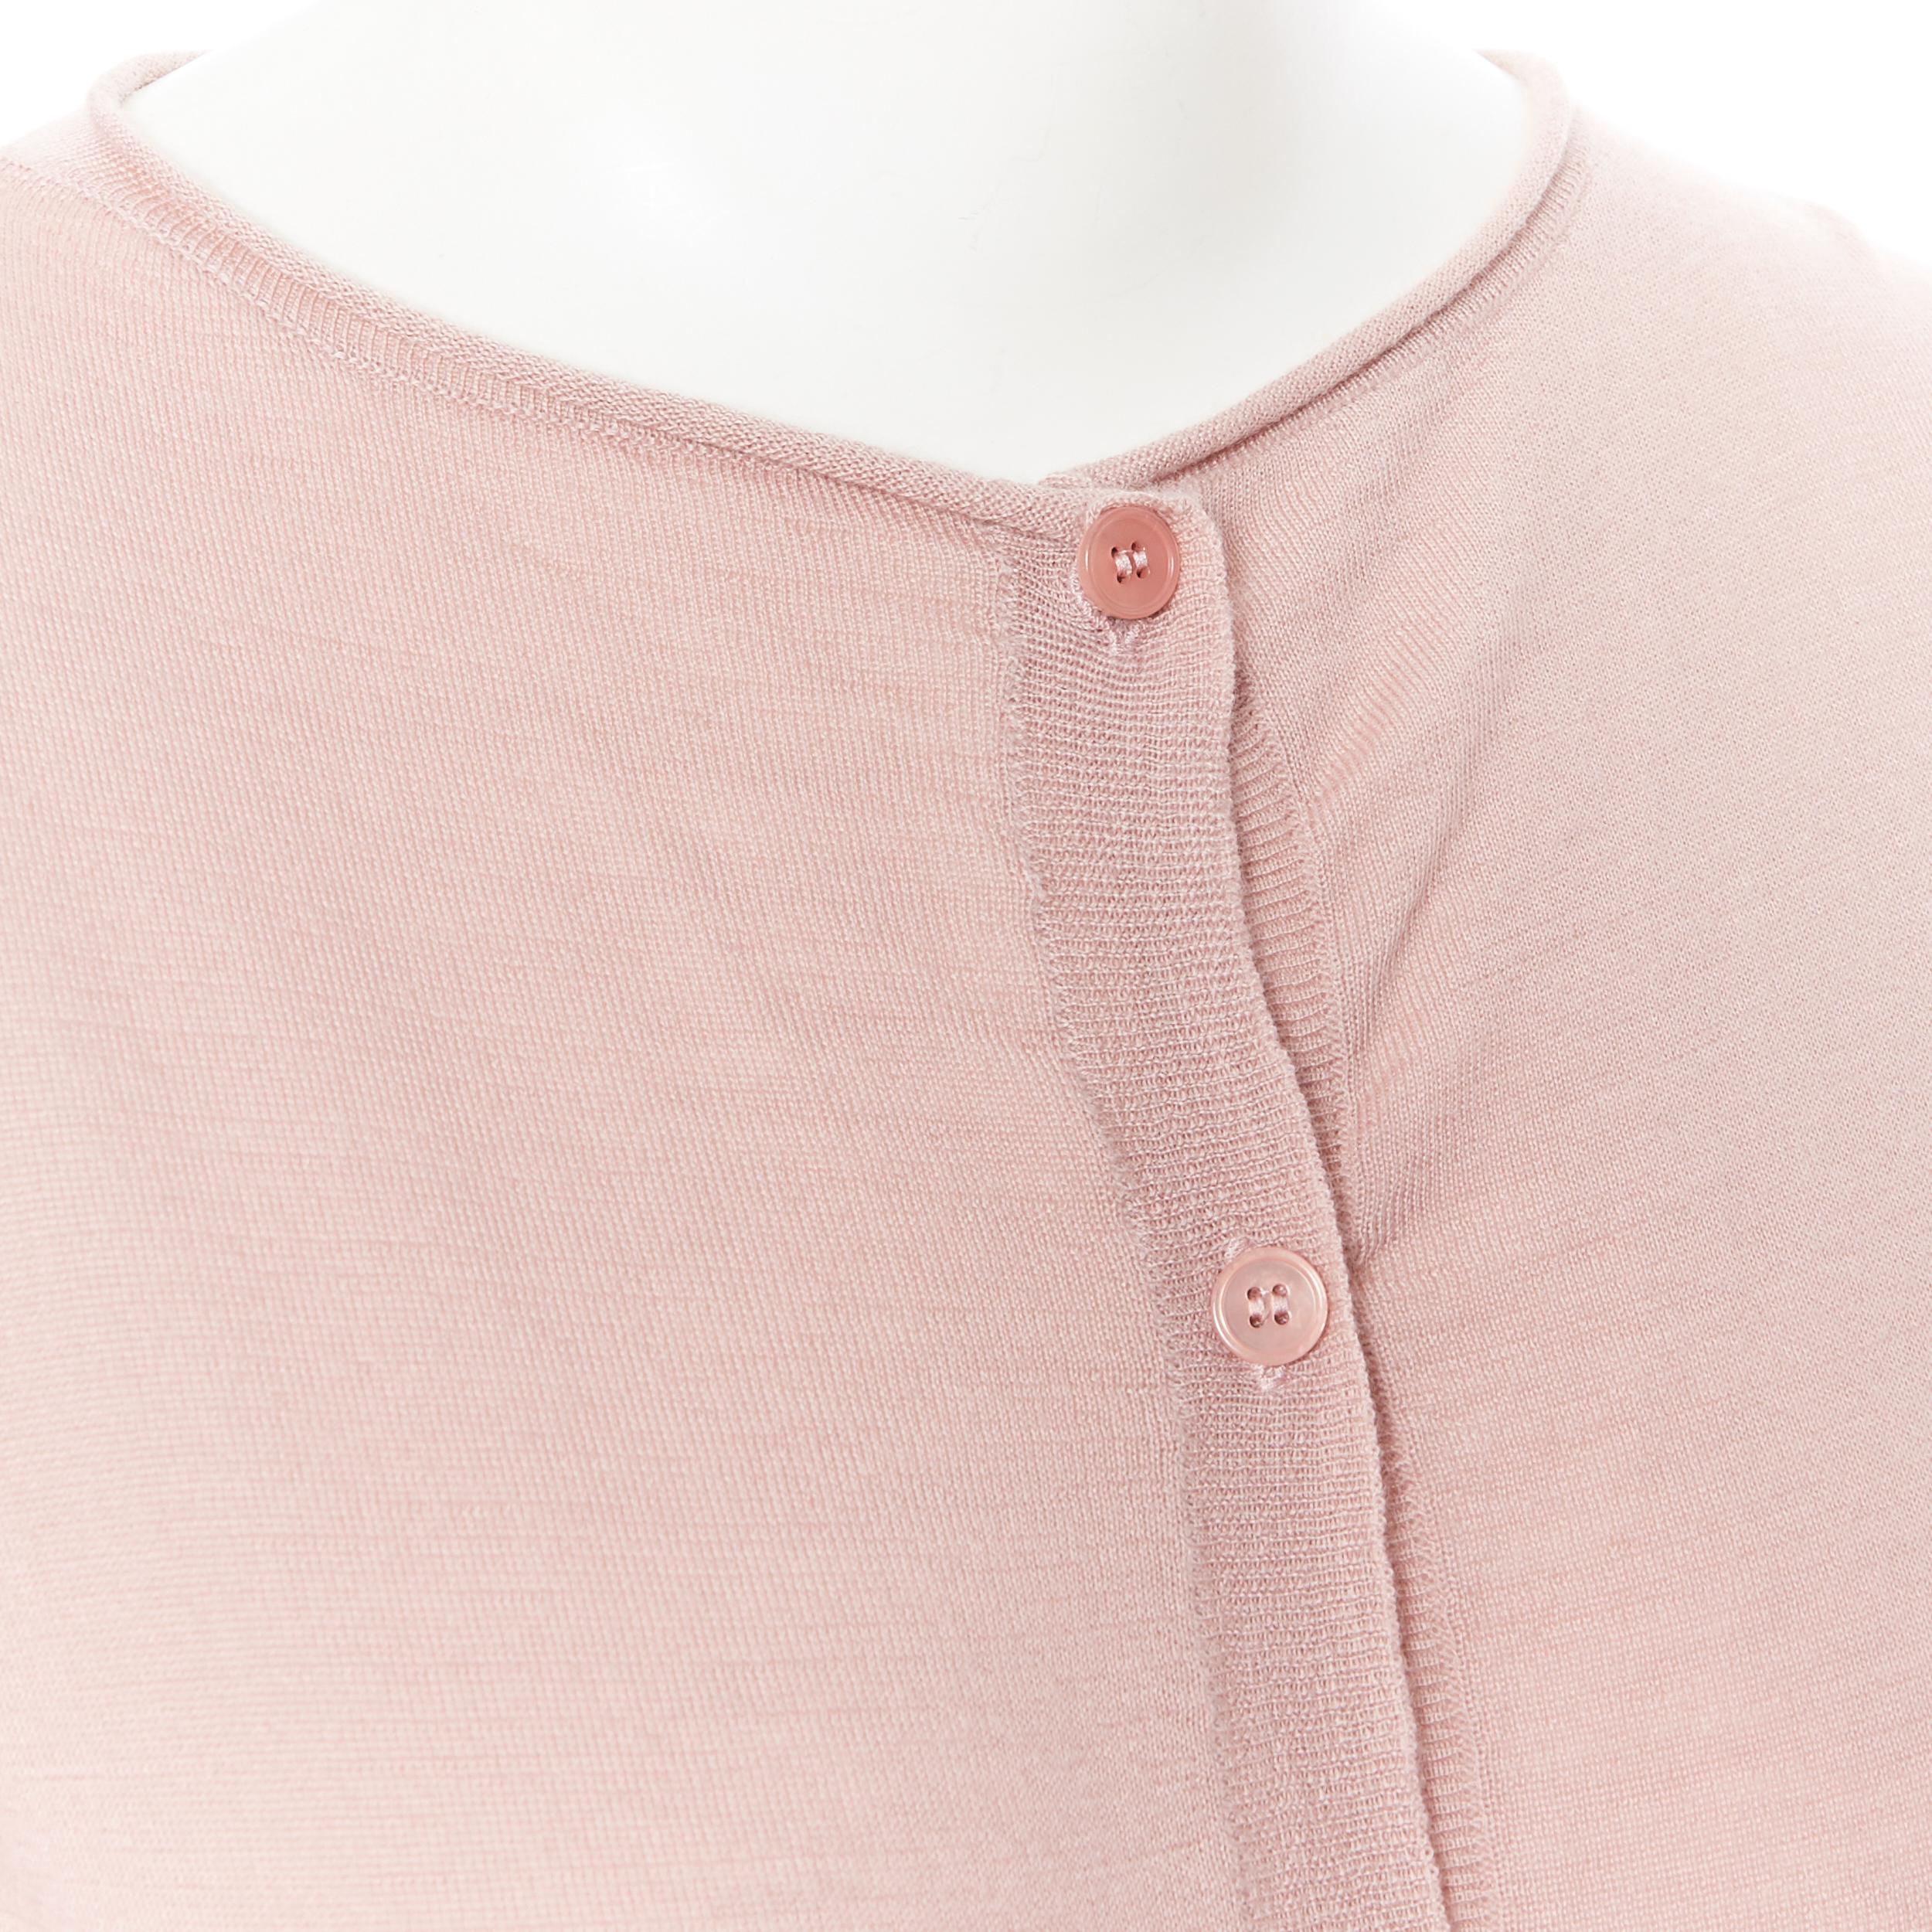 MARNI 100% cashmere blush pink rolled neck button front cardigan sweater IT38 Reference: LNKO/A01277 
Brand: Marni 
Material: Cashmere 
Color: Pink 
Pattern: Solid 
Closure: Button 
Made in: Italy 

CONDITION: 
Condition: Very good, this item was